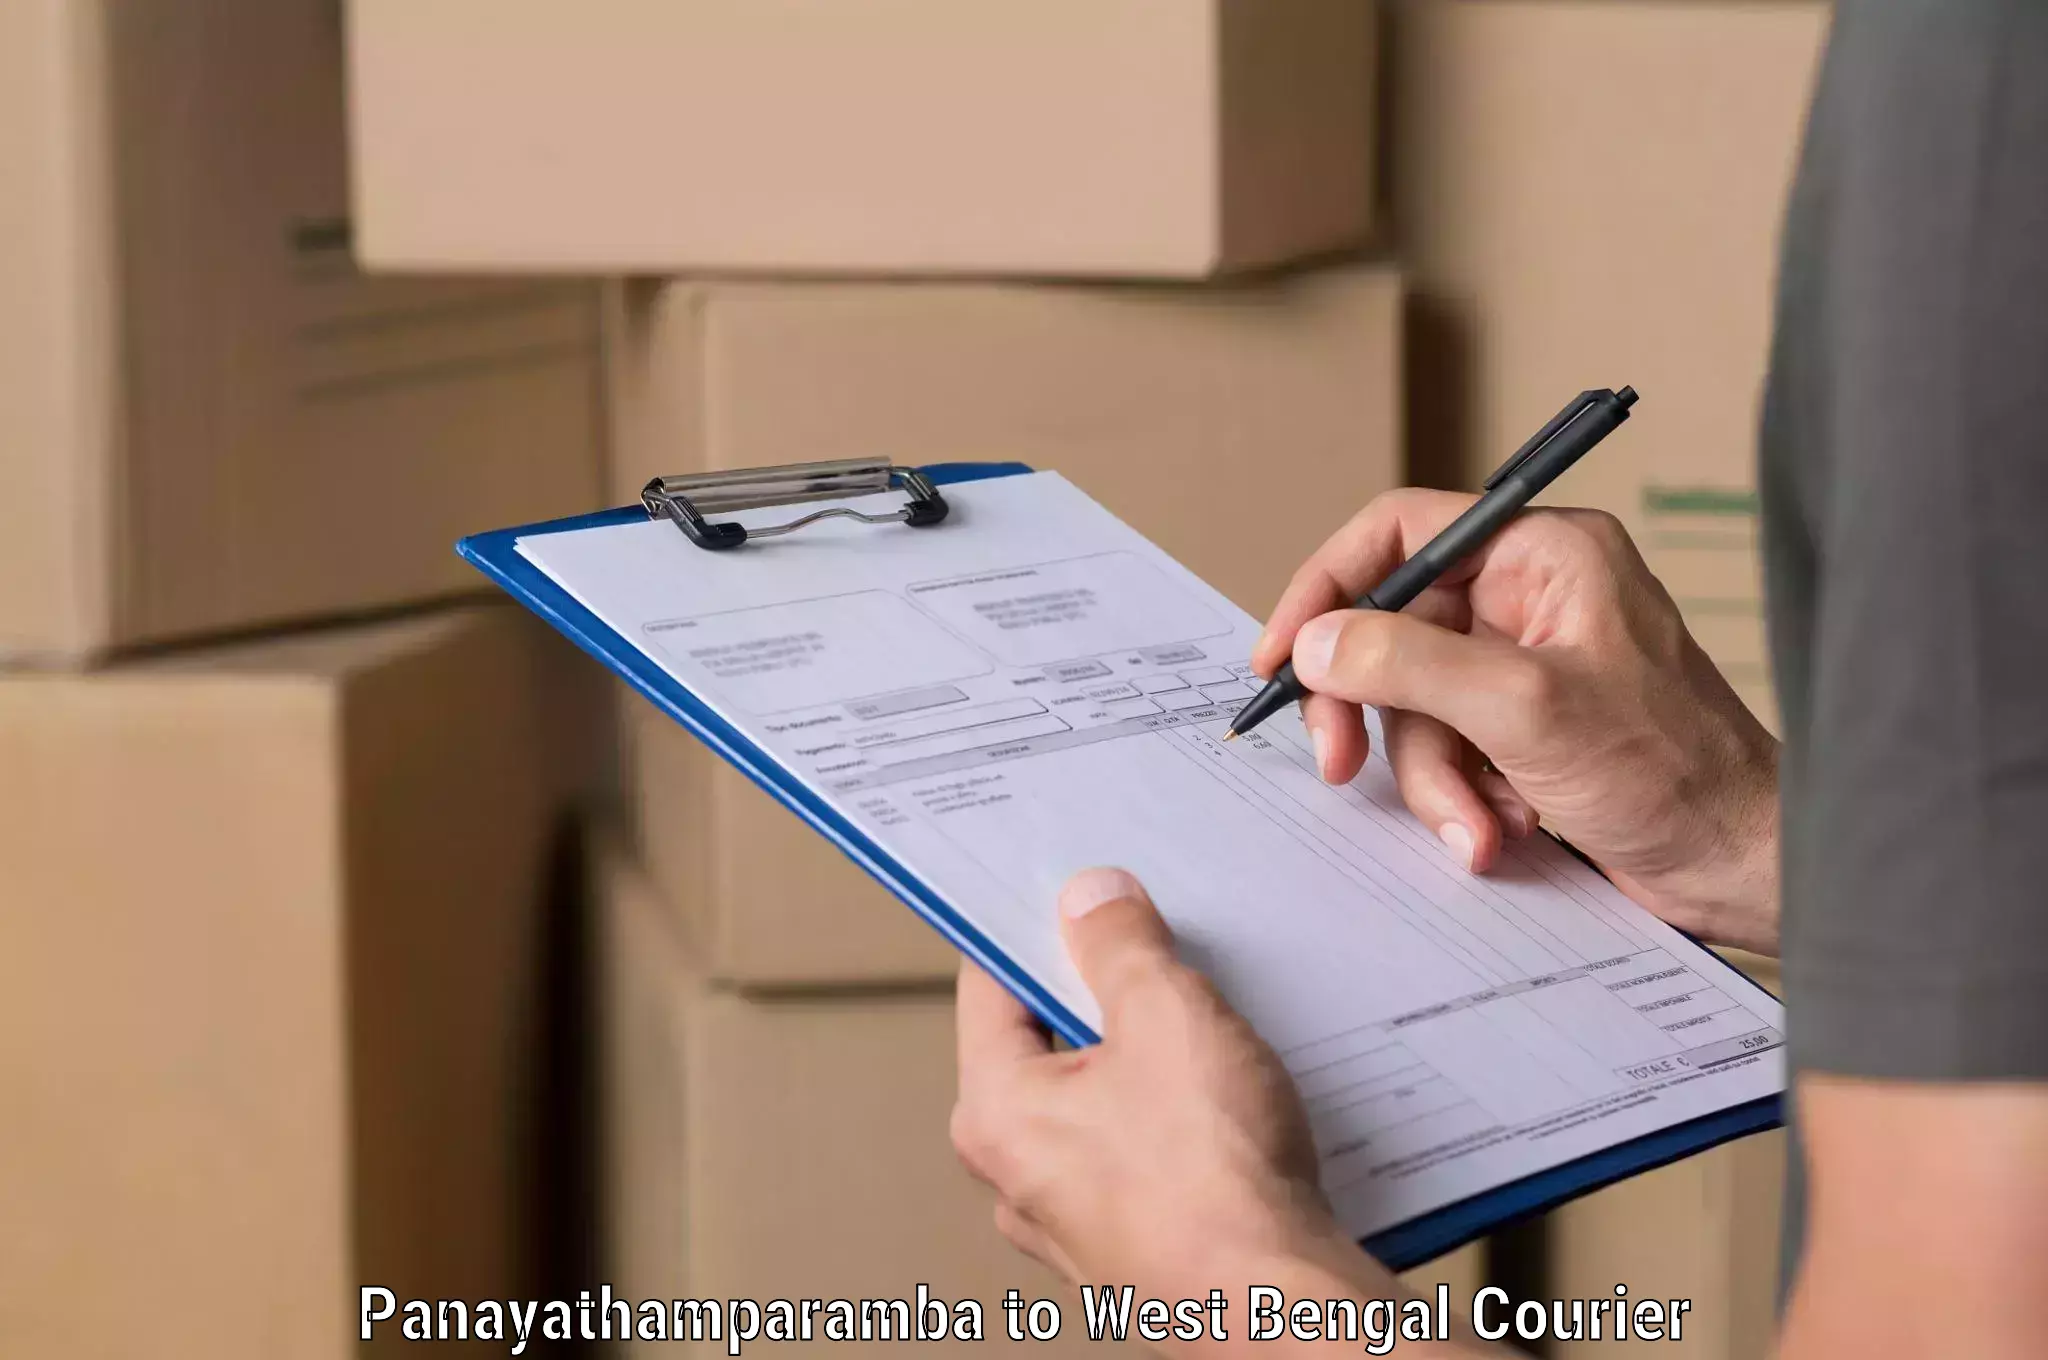 Medical delivery services in Panayathamparamba to Park Street